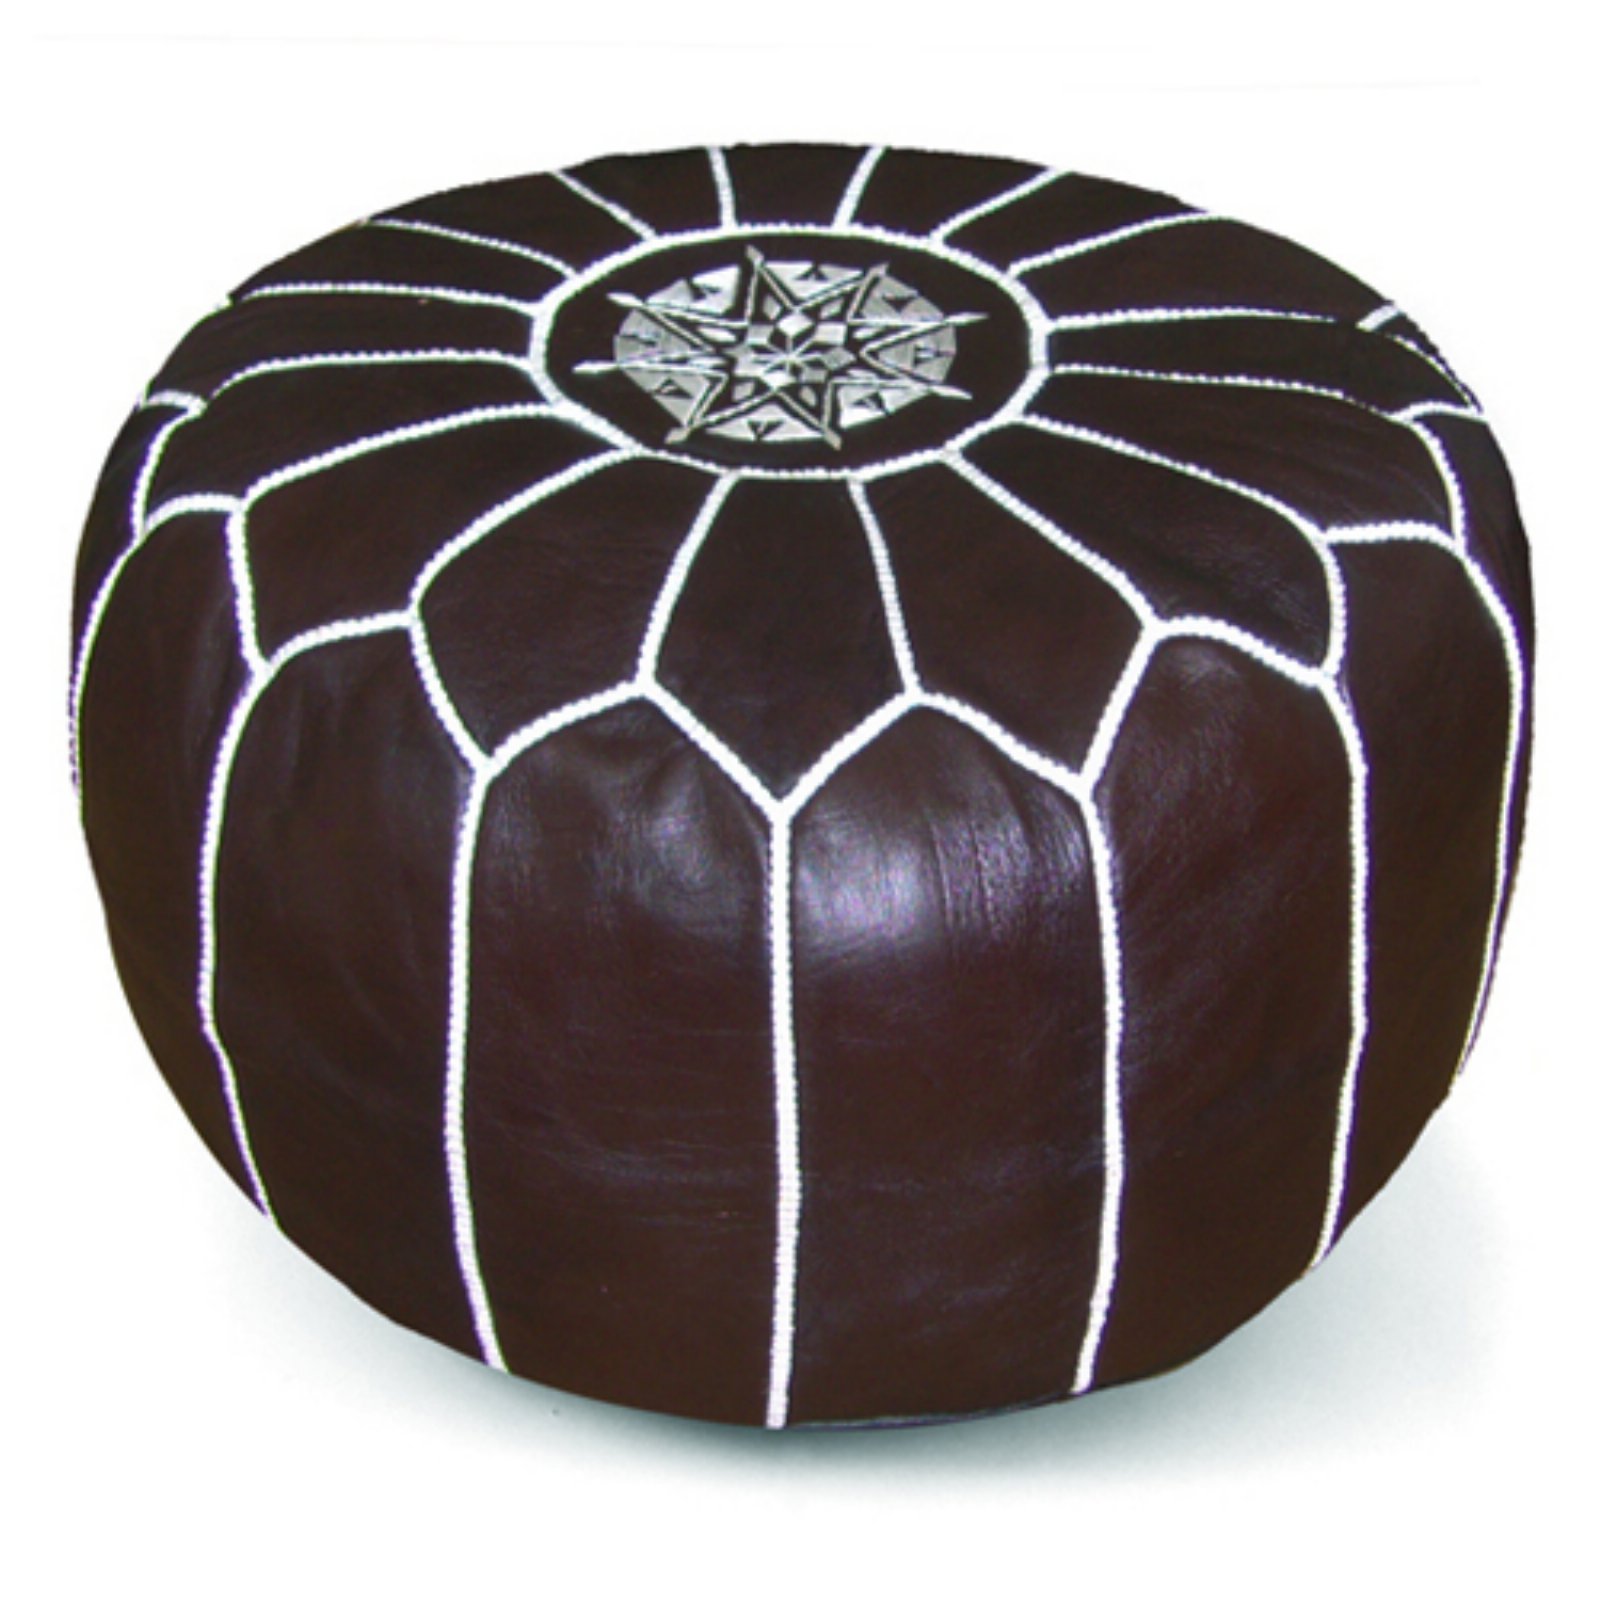 Ikram Design Round Moroccan Leather Pouf - image 1 of 4